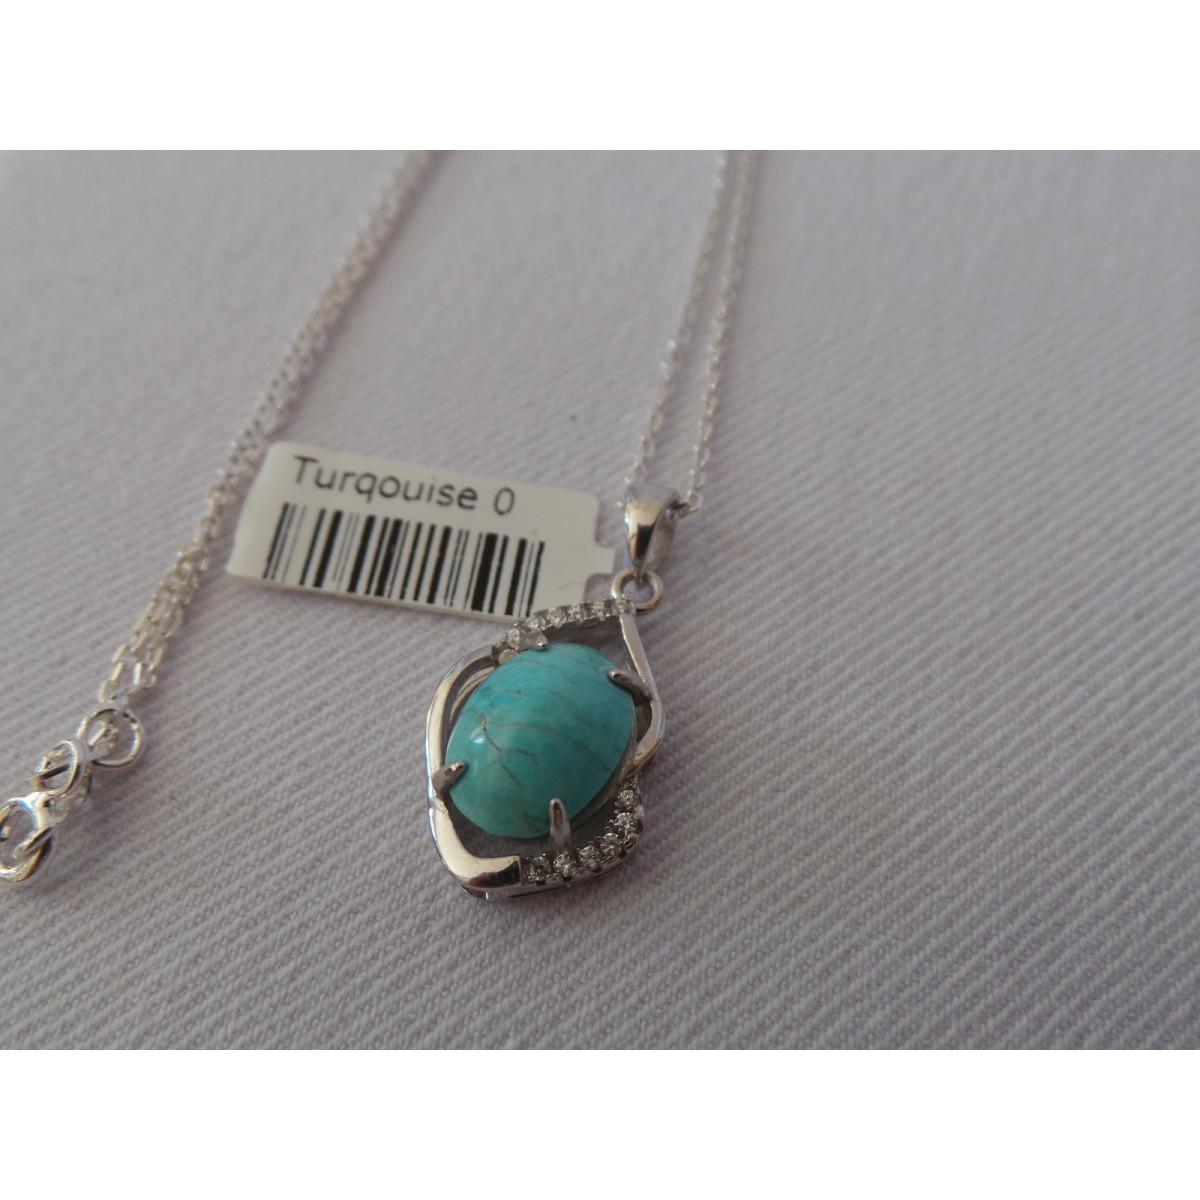 Turquoise Stone and Silver Pendant with Silver Necklace - HA2088-Persian Handicrafts